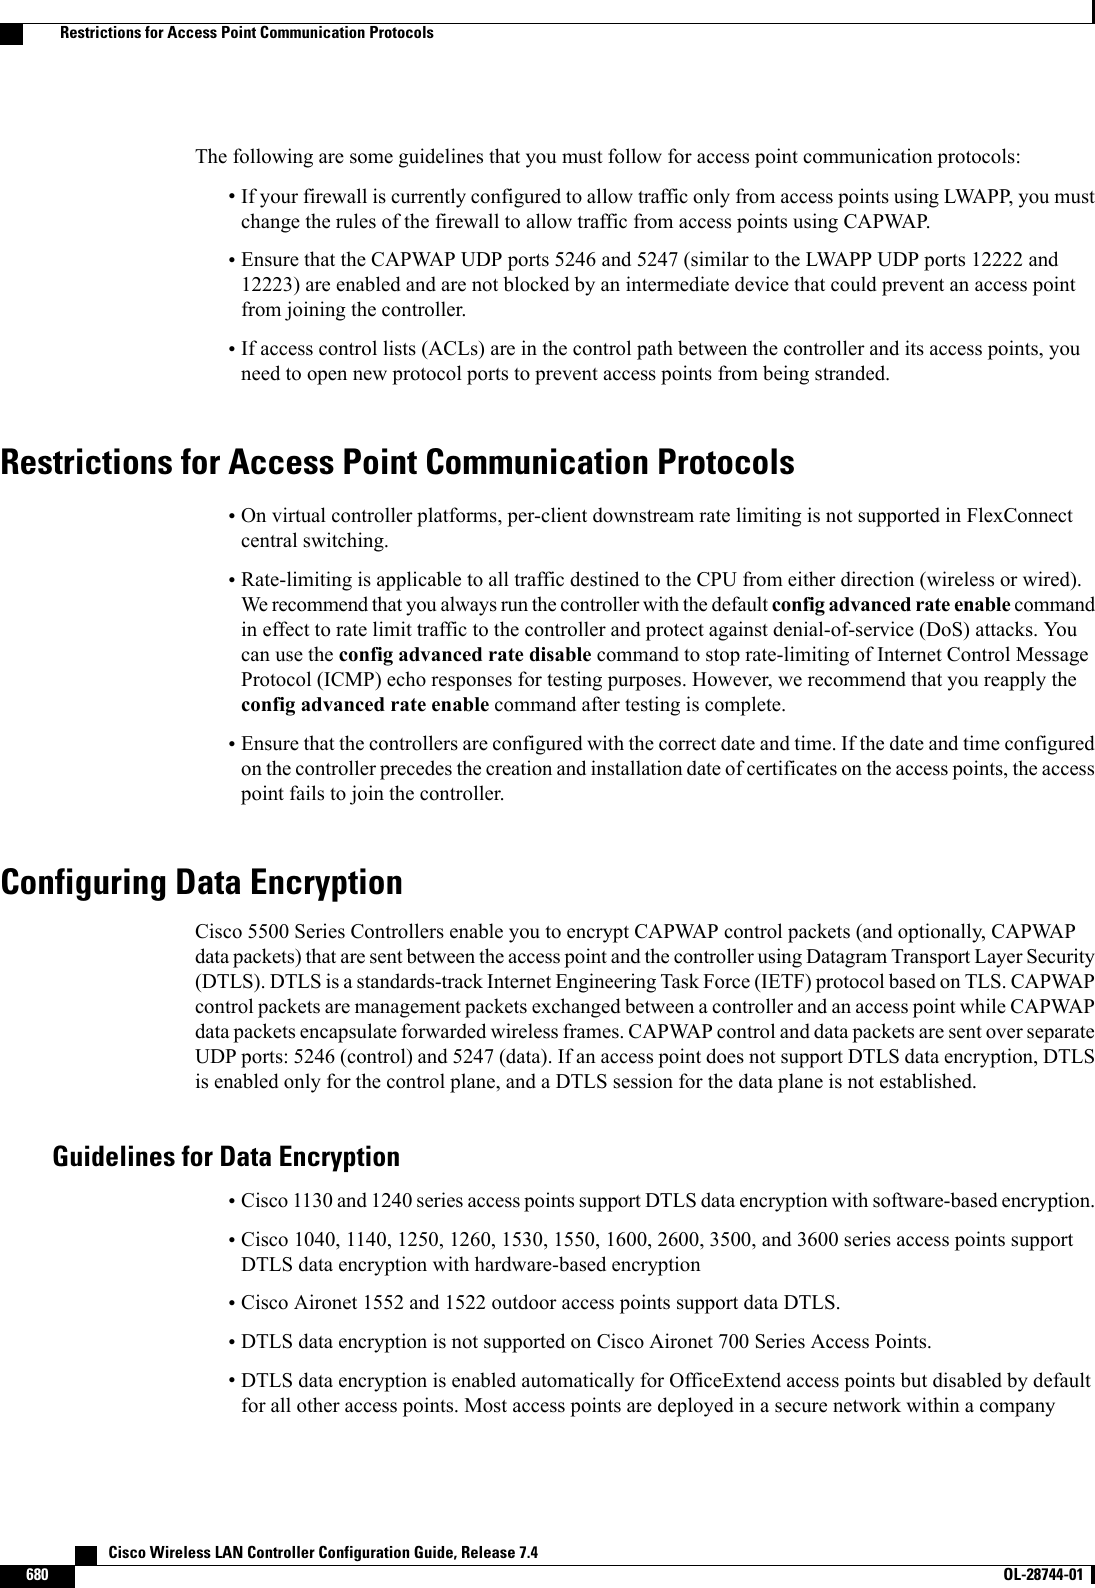 The following are some guidelines that you must follow for access point communication protocols:•If your firewall is currently configured to allow traffic only from access points using LWAPP, you mustchange the rules of the firewall to allow traffic from access points using CAPWAP.•Ensure that the CAPWAP UDP ports 5246 and 5247 (similar to the LWAPP UDP ports 12222 and12223) are enabled and are not blocked by an intermediate device that could prevent an access pointfrom joining the controller.•If access control lists (ACLs) are in the control path between the controller and its access points, youneed to open new protocol ports to prevent access points from being stranded.Restrictions for Access Point Communication Protocols•On virtual controller platforms, per-client downstream rate limiting is not supported in FlexConnectcentral switching.•Rate-limiting is applicable to all traffic destined to the CPU from either direction (wireless or wired).We recommend that you always run the controller with the default config advanced rate enable commandin effect to rate limit traffic to the controller and protect against denial-of-service (DoS) attacks. Youcan use the config advanced rate disable command to stop rate-limiting of Internet Control MessageProtocol (ICMP) echo responses for testing purposes. However, we recommend that you reapply theconfig advanced rate enable command after testing is complete.•Ensure that the controllers are configured with the correct date and time. If the date and time configuredon the controller precedes the creation and installation date of certificates on the access points, the accesspoint fails to join the controller.Configuring Data EncryptionCisco 5500 Series Controllers enable you to encrypt CAPWAP control packets (and optionally, CAPWAPdata packets) that are sent between the access point and the controller using Datagram Transport Layer Security(DTLS). DTLS is a standards-track Internet Engineering Task Force (IETF) protocol based on TLS. CAPWAPcontrol packets are management packets exchanged between a controller and an access point while CAPWAPdata packets encapsulate forwarded wireless frames. CAPWAP control and data packets are sent over separateUDP ports: 5246 (control) and 5247 (data). If an access point does not support DTLS data encryption, DTLSis enabled only for the control plane, and a DTLS session for the data plane is not established.Guidelines for Data Encryption•Cisco 1130 and 1240 series access points support DTLS data encryption with software-based encryption.•Cisco 1040, 1140, 1250, 1260, 1530, 1550, 1600, 2600, 3500, and 3600 series access points supportDTLS data encryption with hardware-based encryption•Cisco Aironet 1552 and 1522 outdoor access points support data DTLS.•DTLS data encryption is not supported on Cisco Aironet 700 Series Access Points.•DTLS data encryption is enabled automatically for OfficeExtend access points but disabled by defaultfor all other access points. Most access points are deployed in a secure network within a company   Cisco Wireless LAN Controller Configuration Guide, Release 7.4680 OL-28744-01  Restrictions for Access Point Communication Protocols